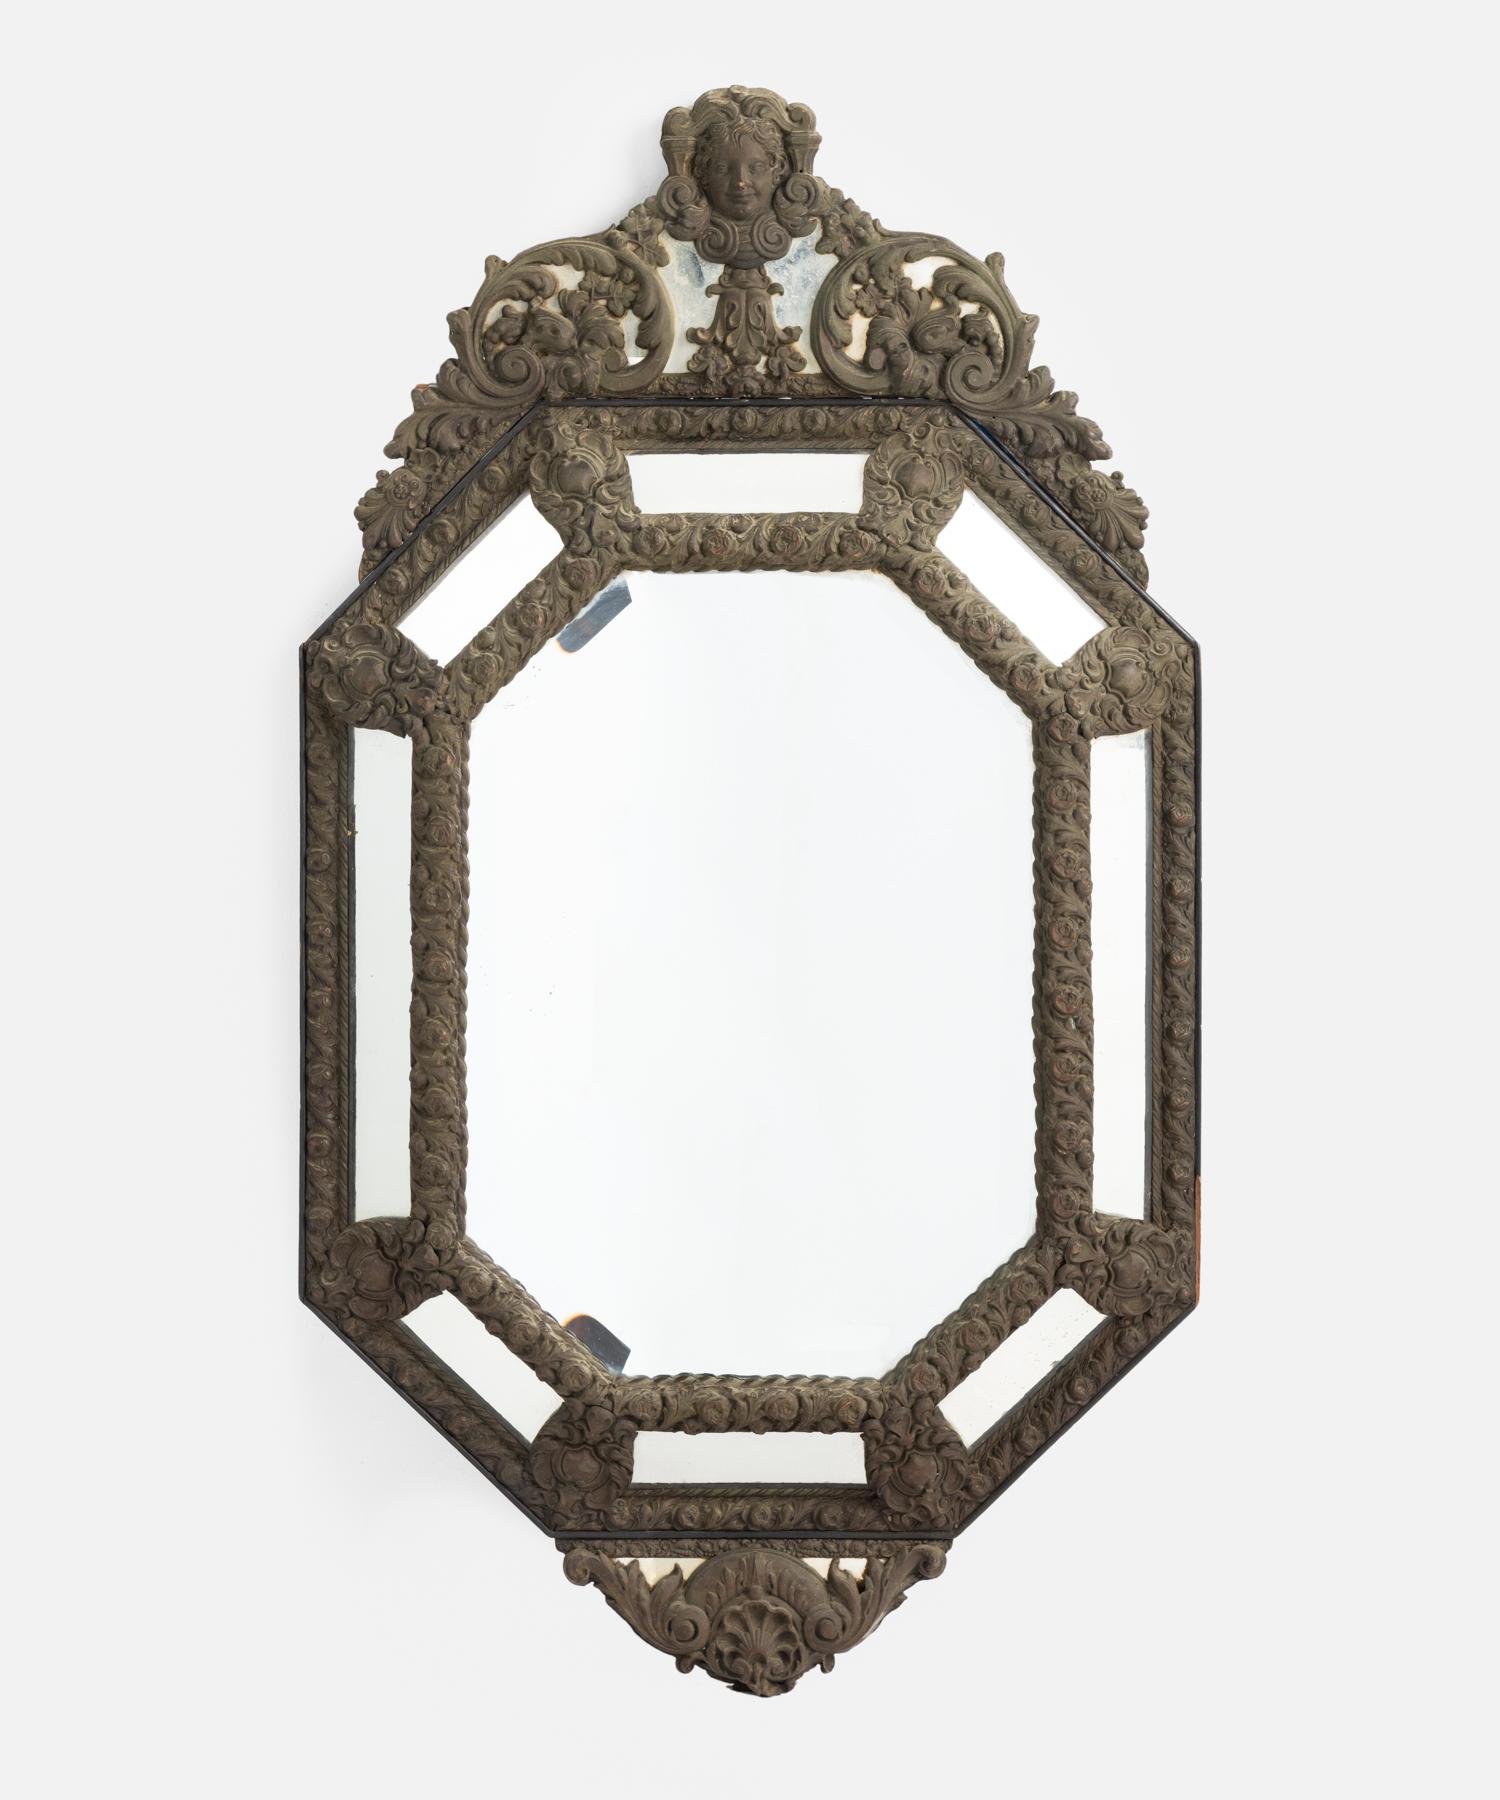 Hammered bronze mirror, Italy, circa 1870.

Dimensional form with highly detailed bronze frame and beveled mirror glass.